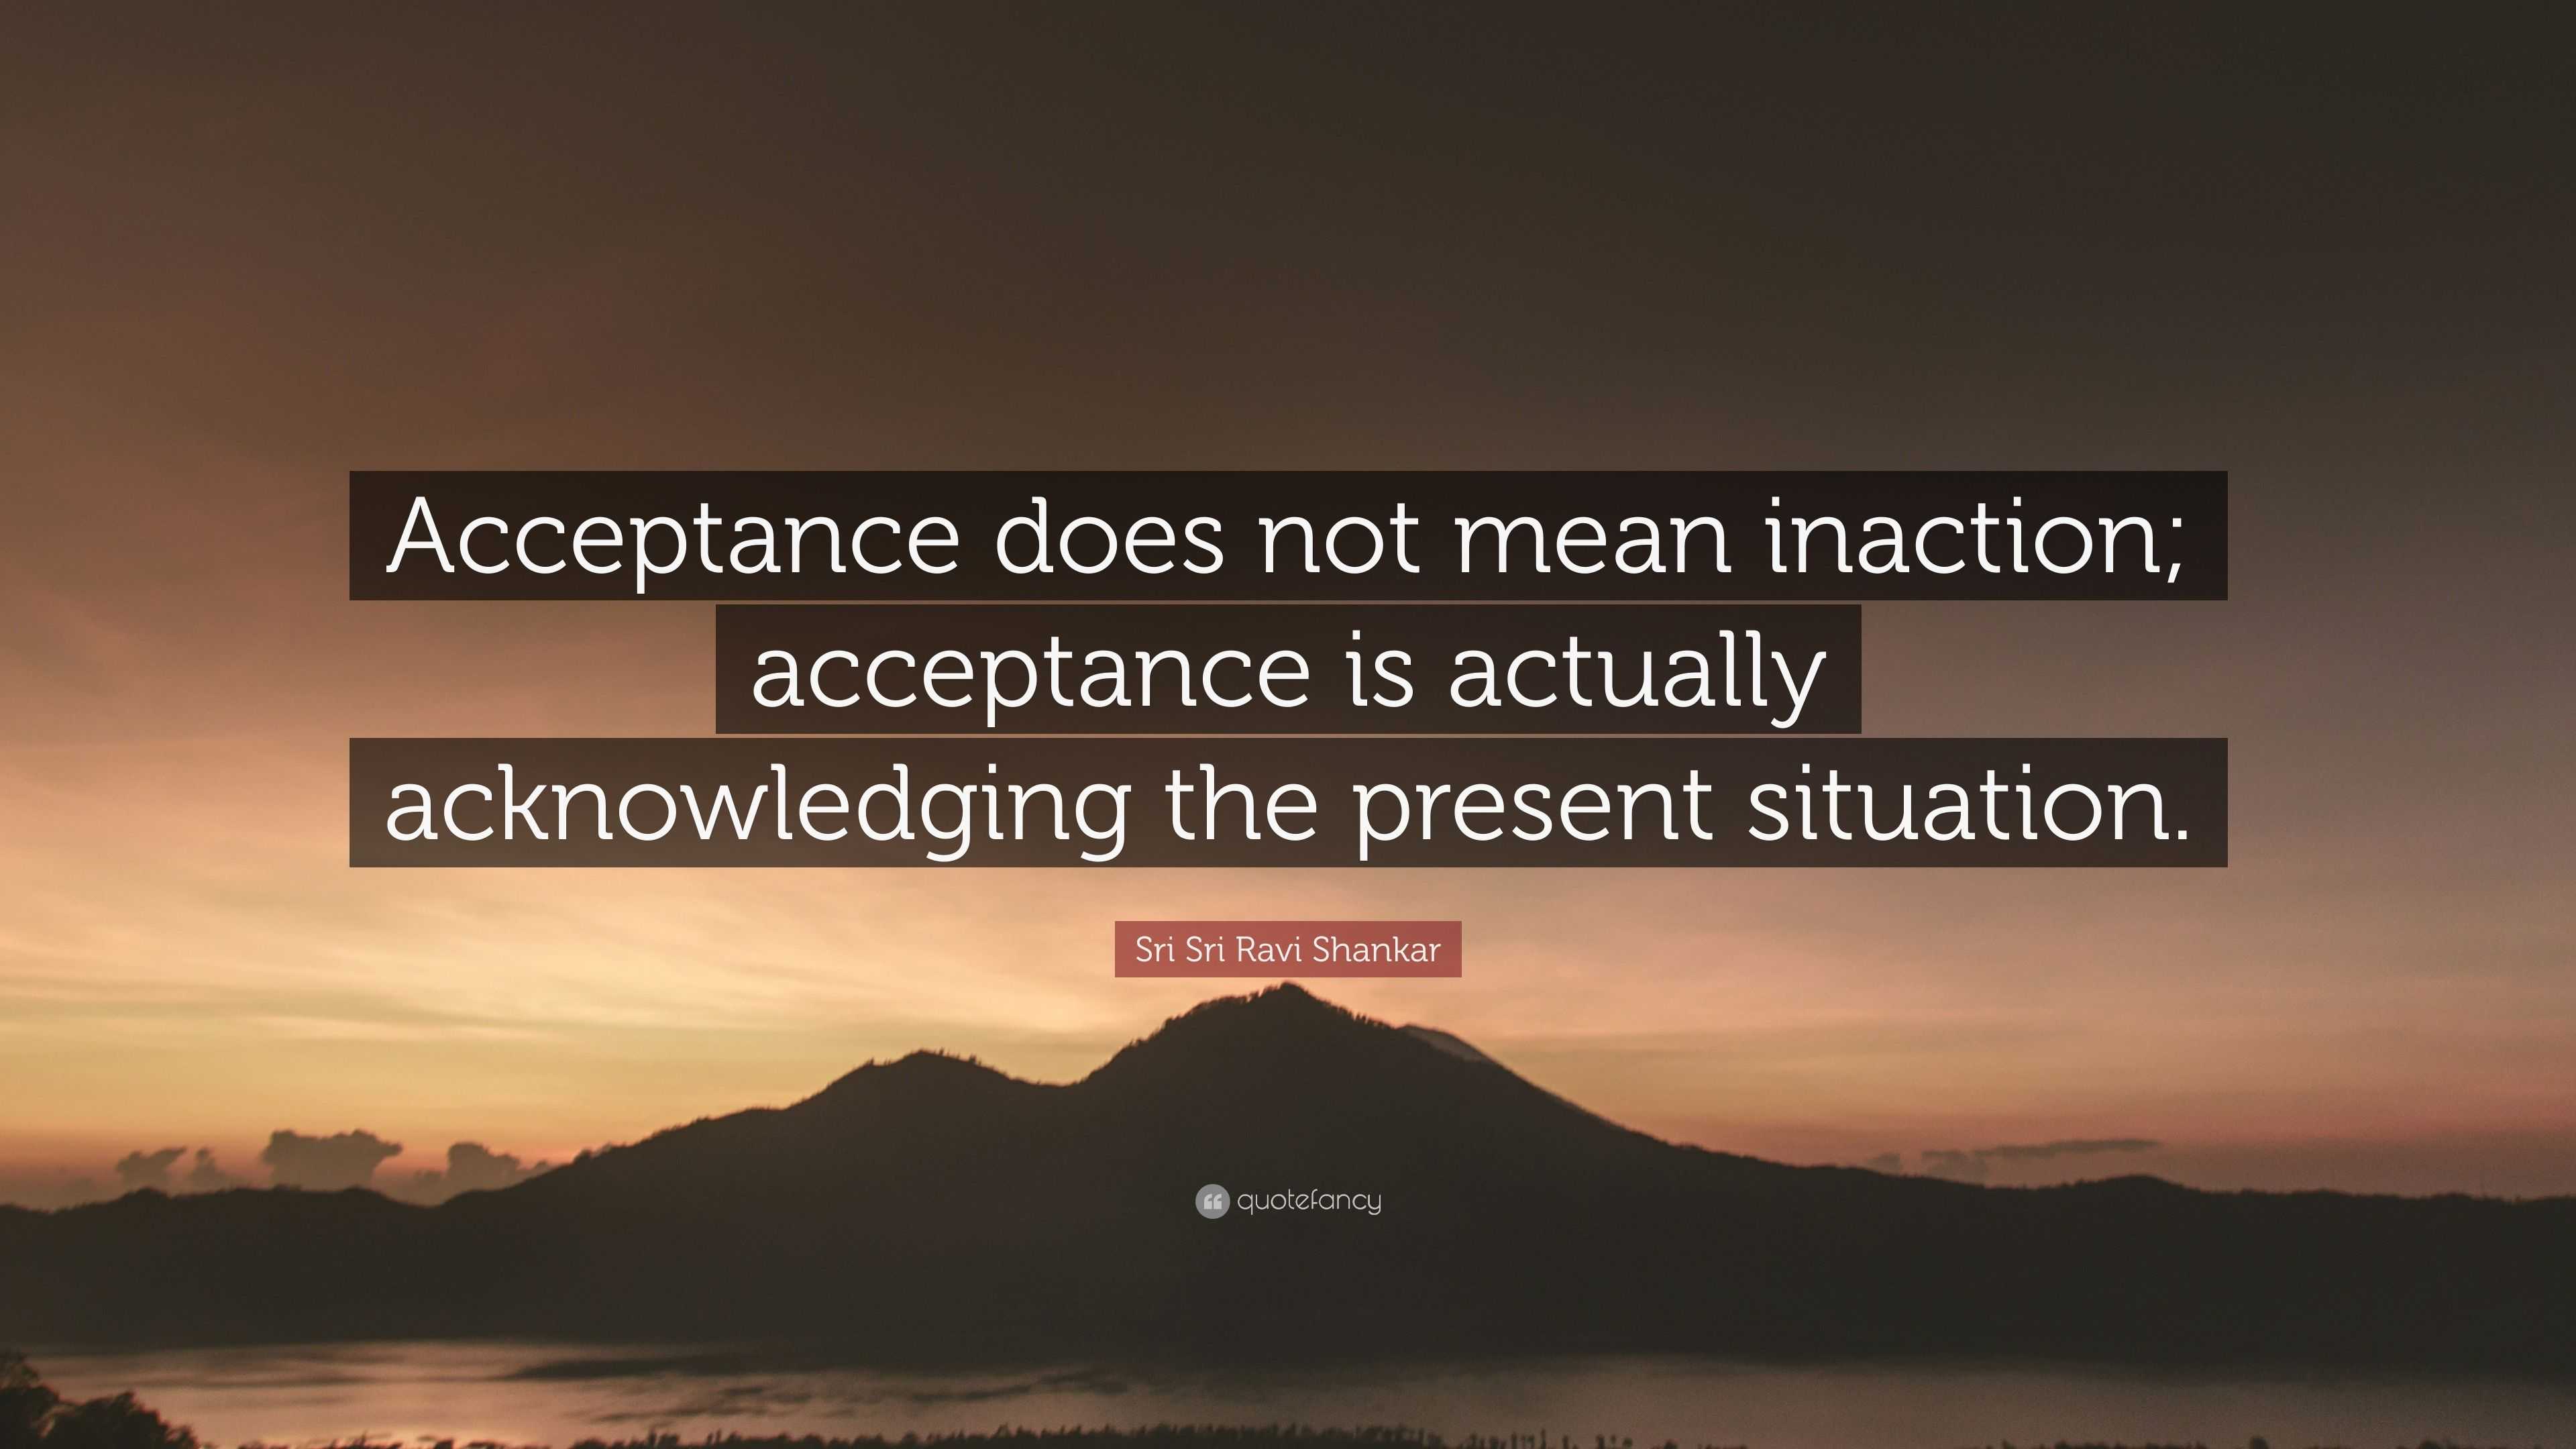 Sri Sri Ravi Shankar Quote: “Acceptance does not mean inaction ...